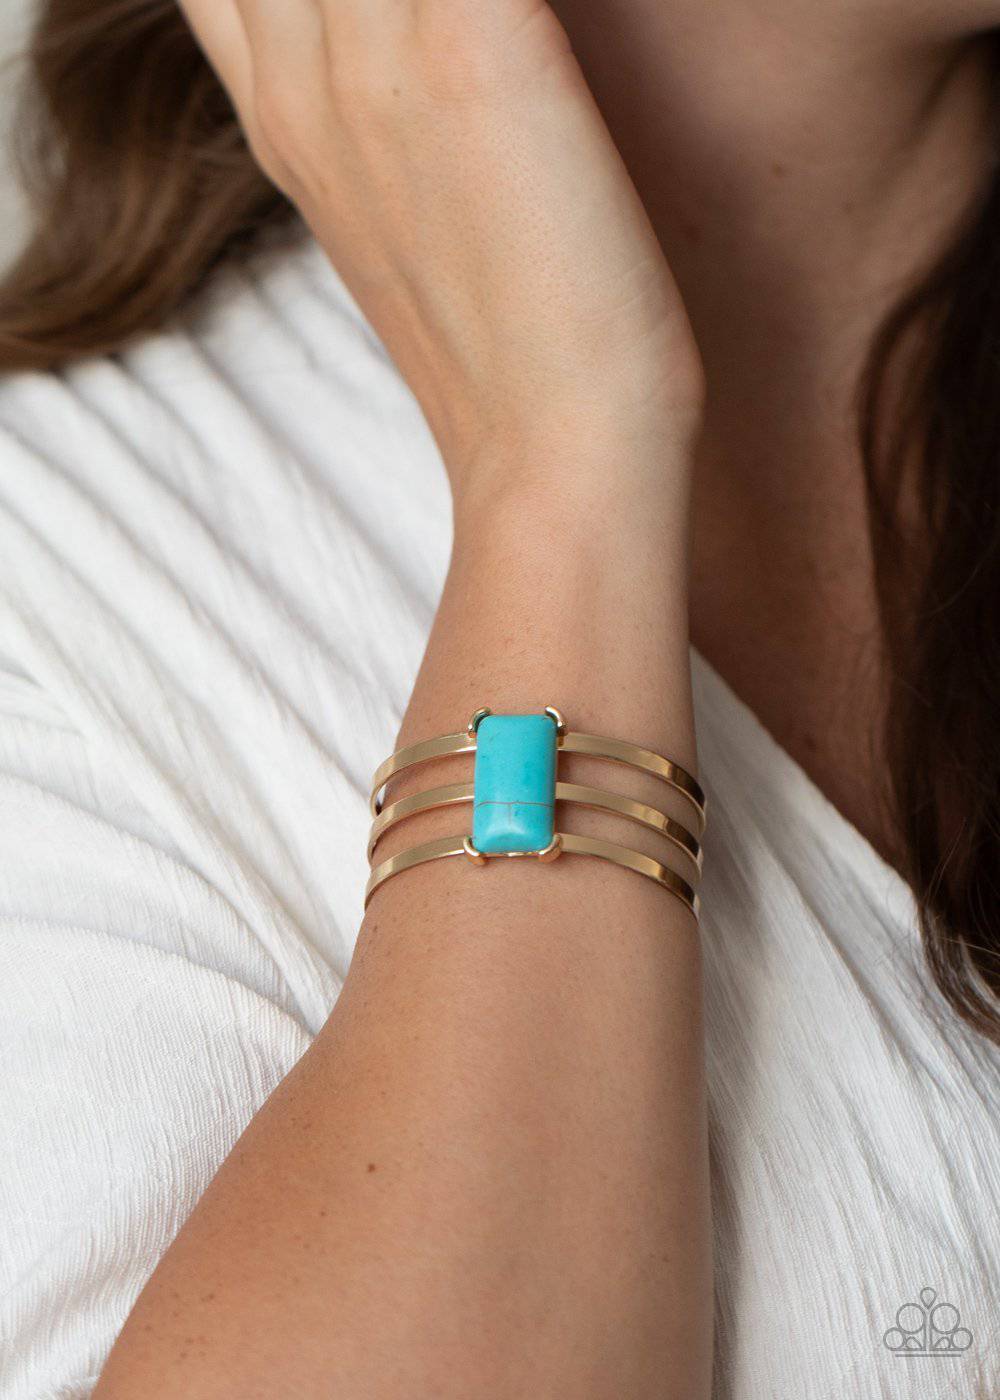 Rural Recreation - Gold and Turquoise Cuff Bracelet - Paparazzi Accessories - GlaMarous Titi Jewels